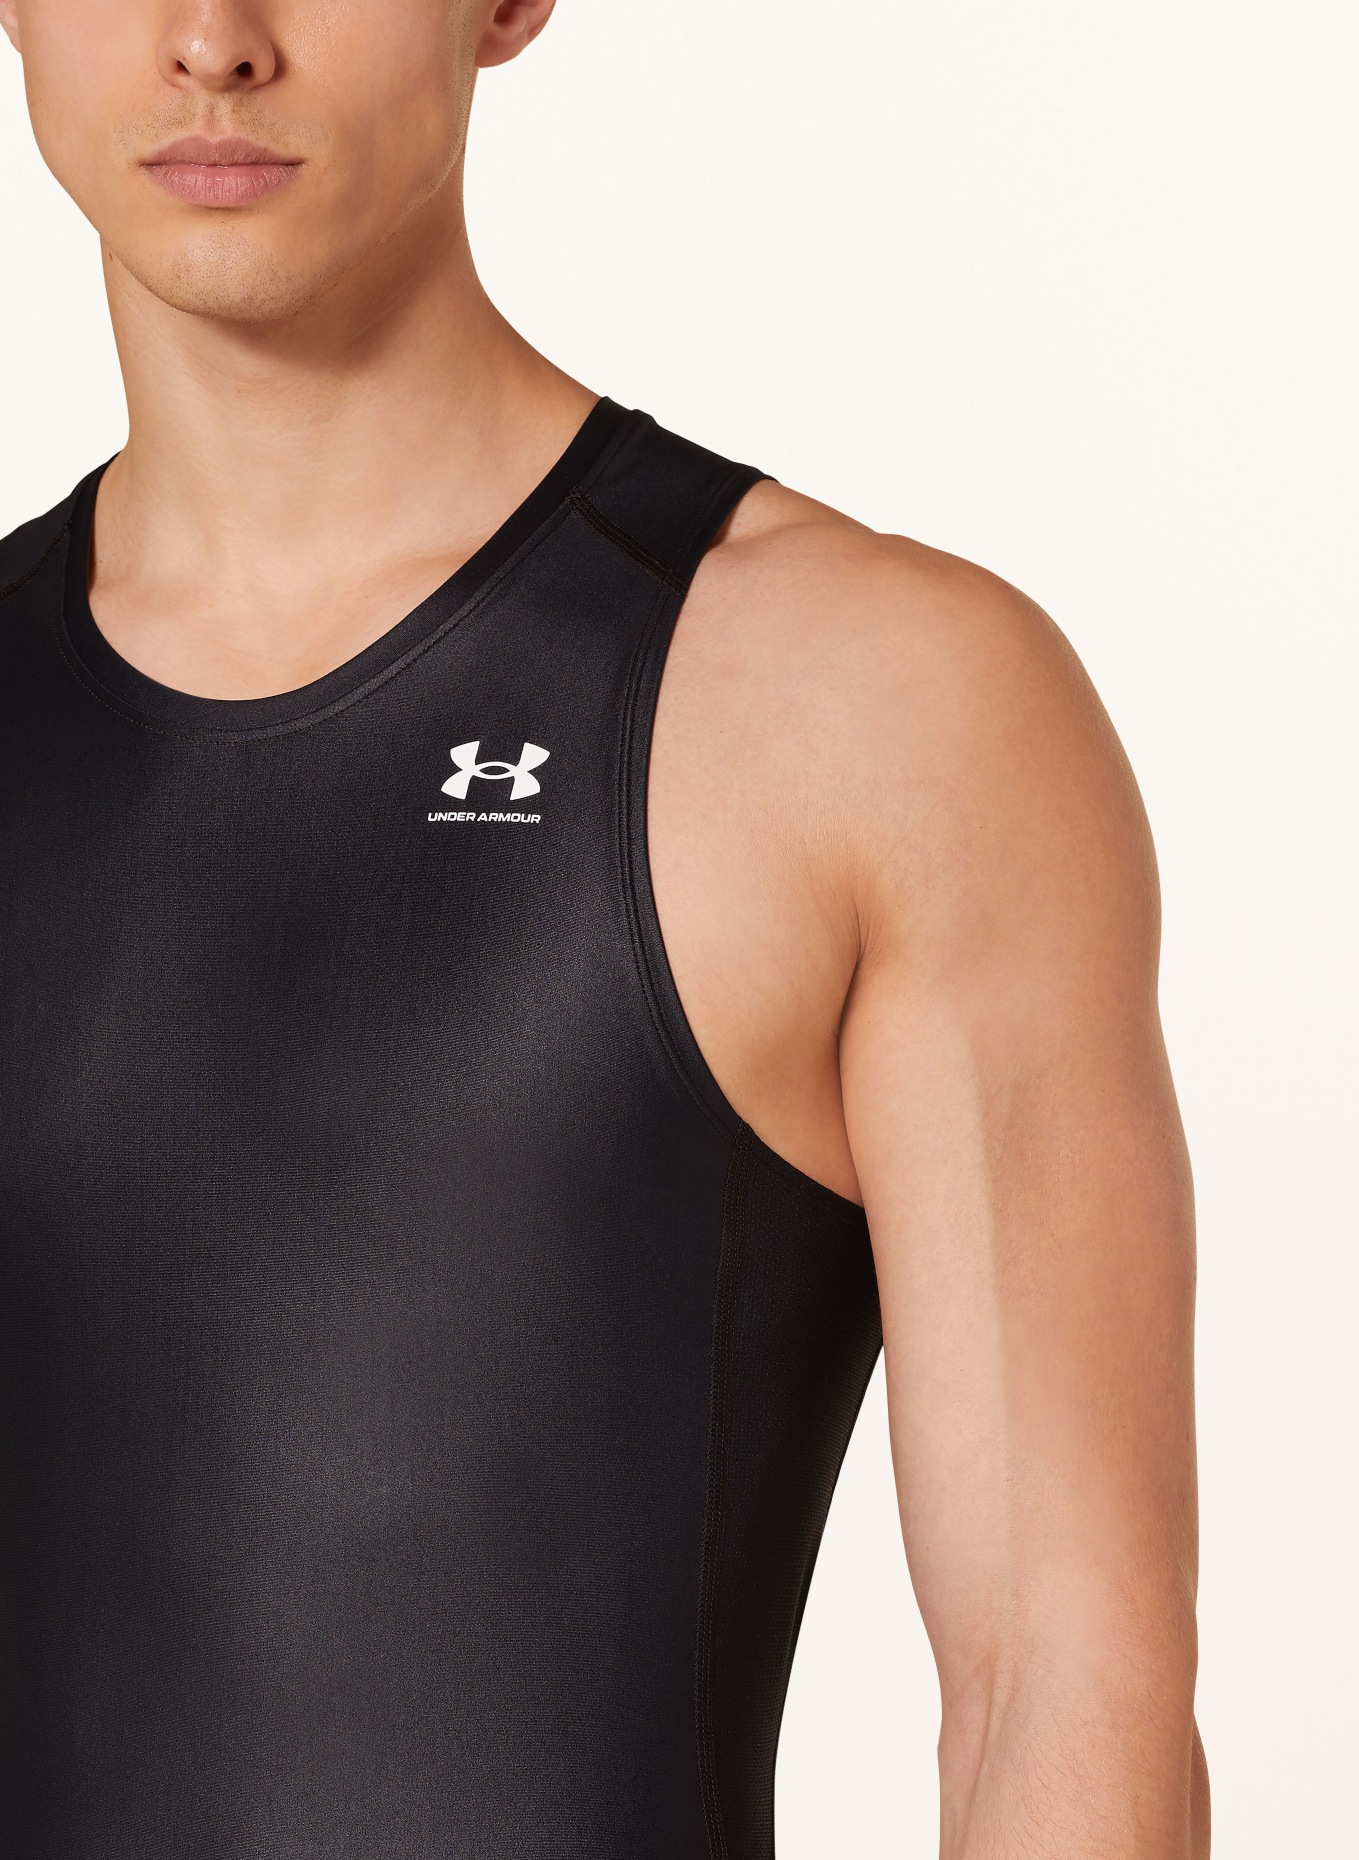 UNDER ARMOUR Running shirt ISO-CHILL, Color: BLACK (Image 4)